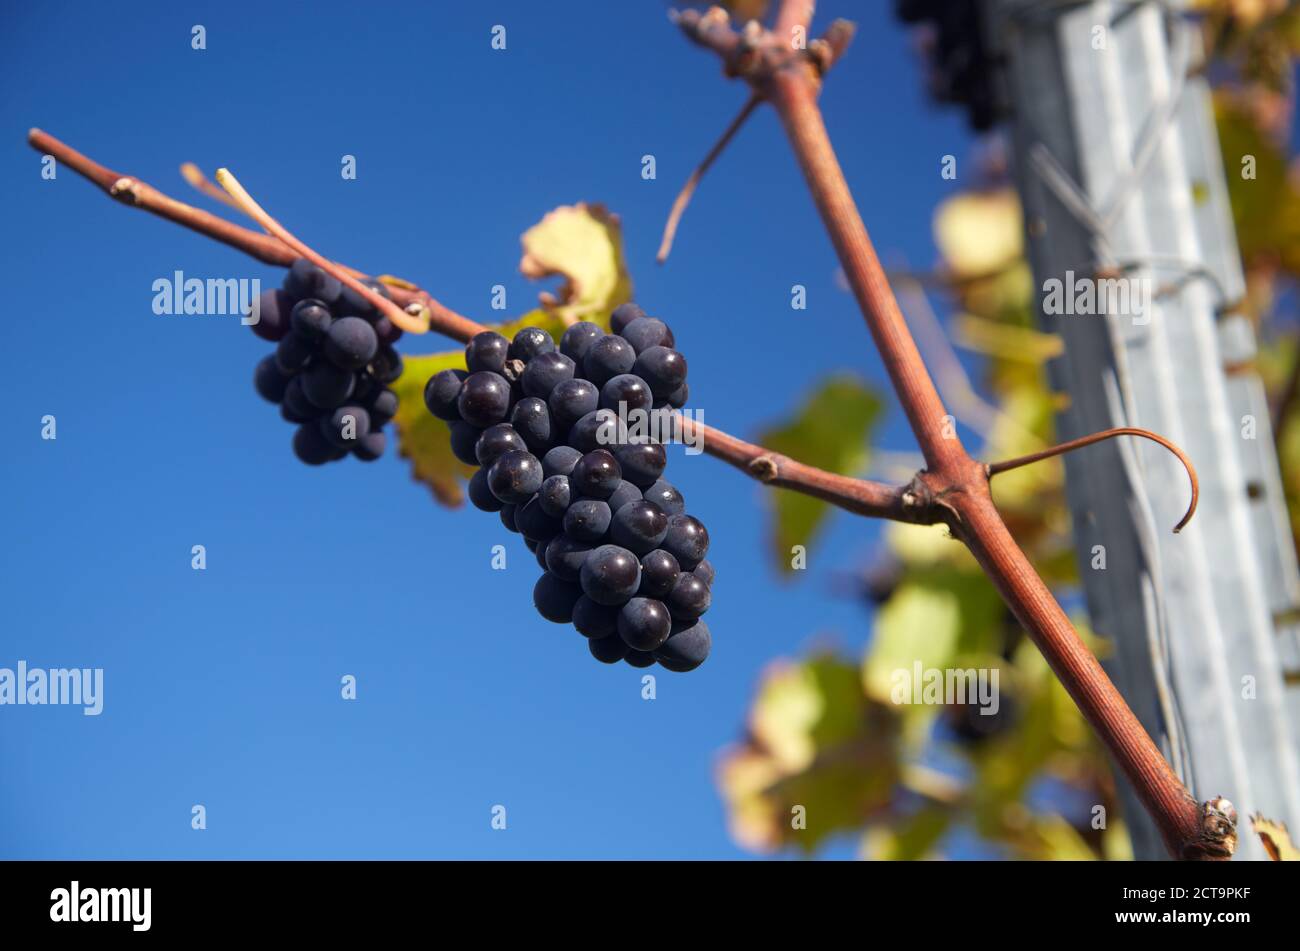 Germany, Baden-Wuerttemberg, wine grapes for pinot noir Stock Photo